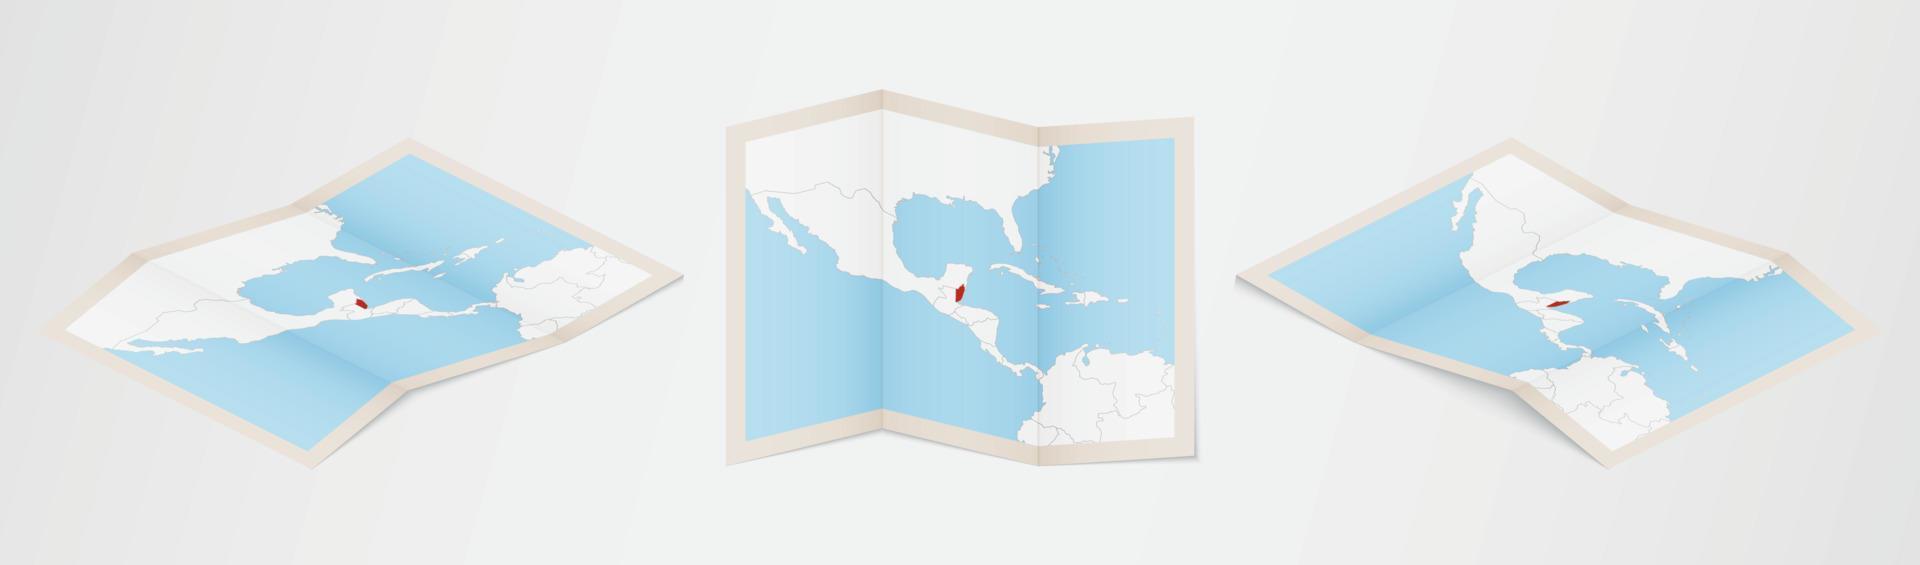 Folded map of Belize in three different versions. vector